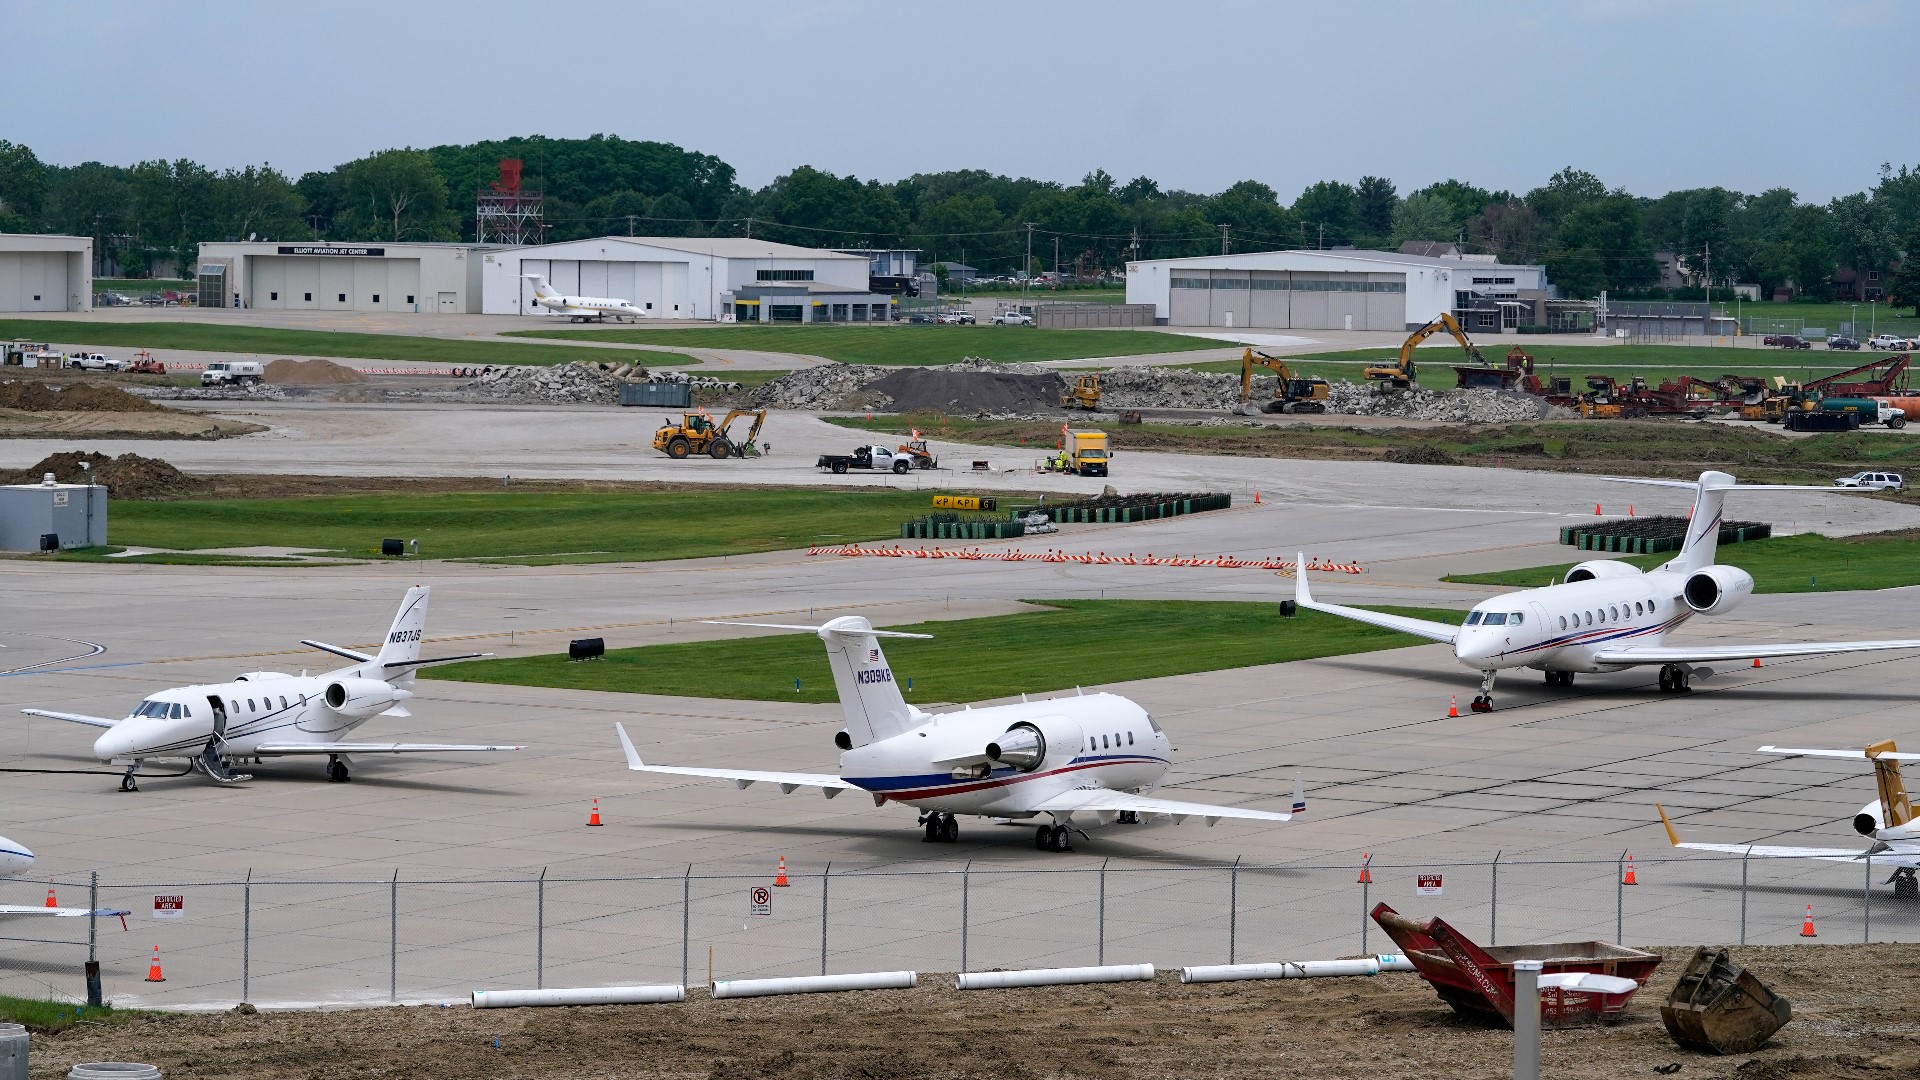 The airport is one of five Iowa airports to receive grant funding from the 2022 Airport Terminal Program.